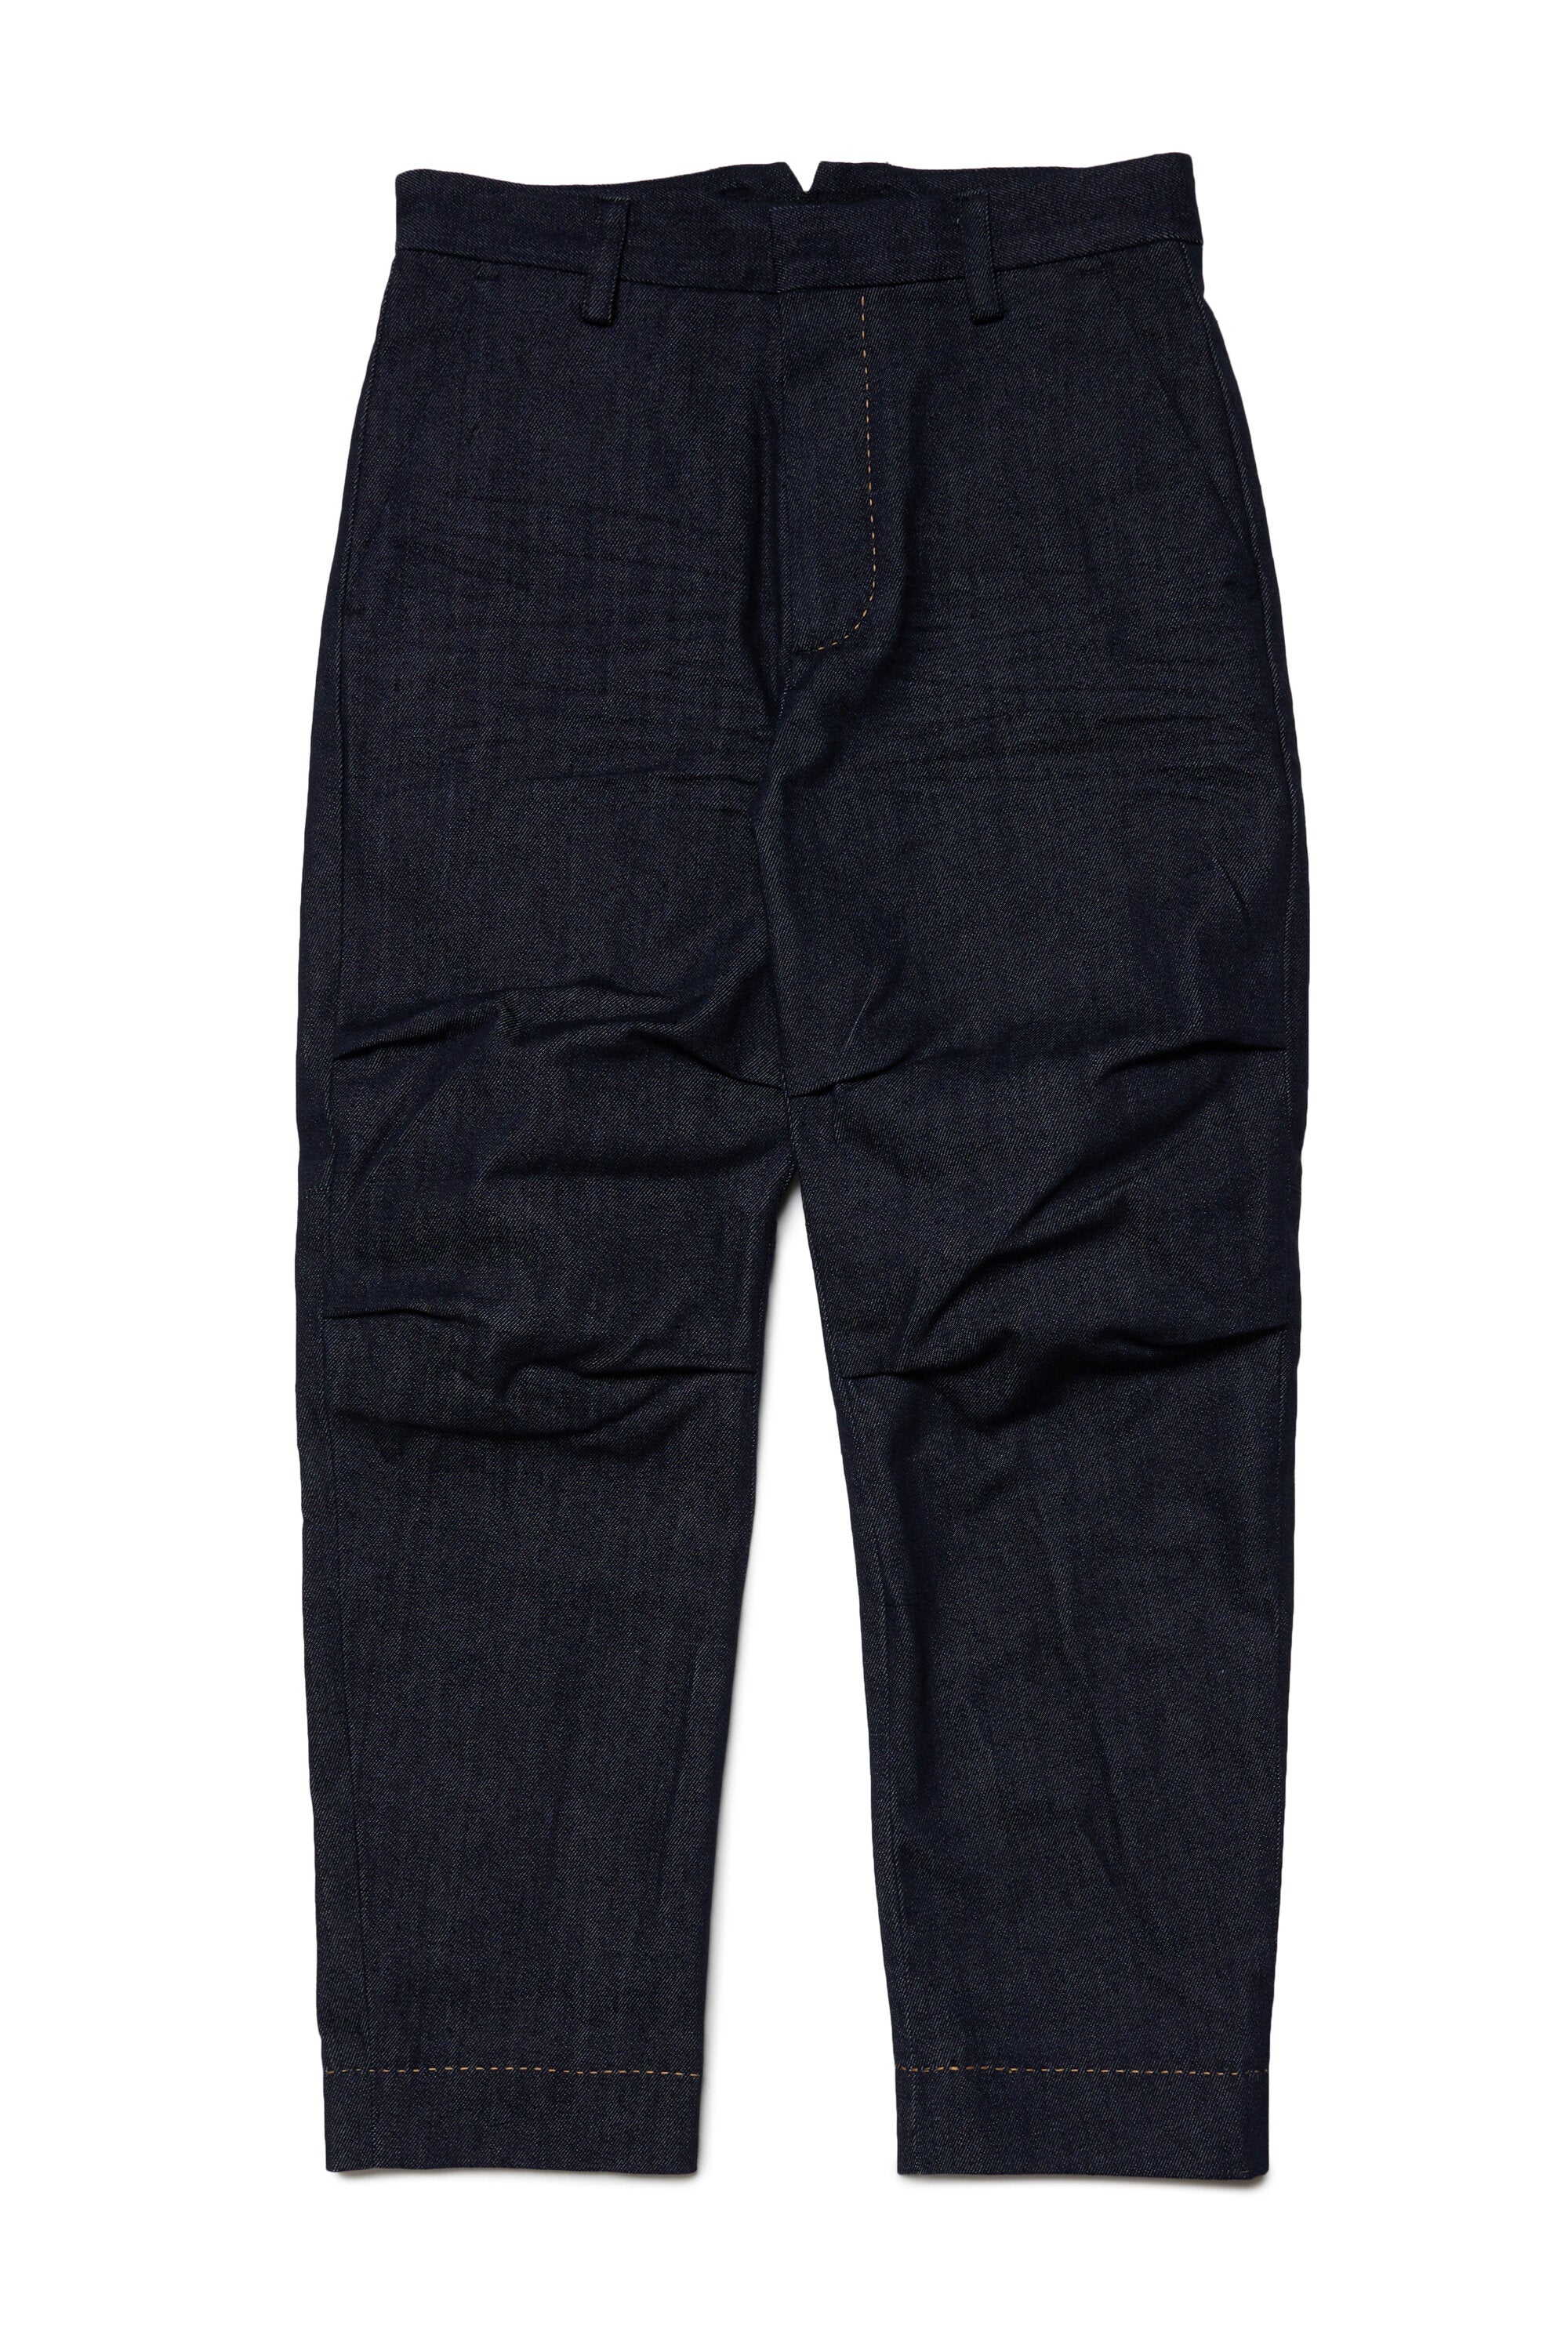 Denim chino pants with wrinkles